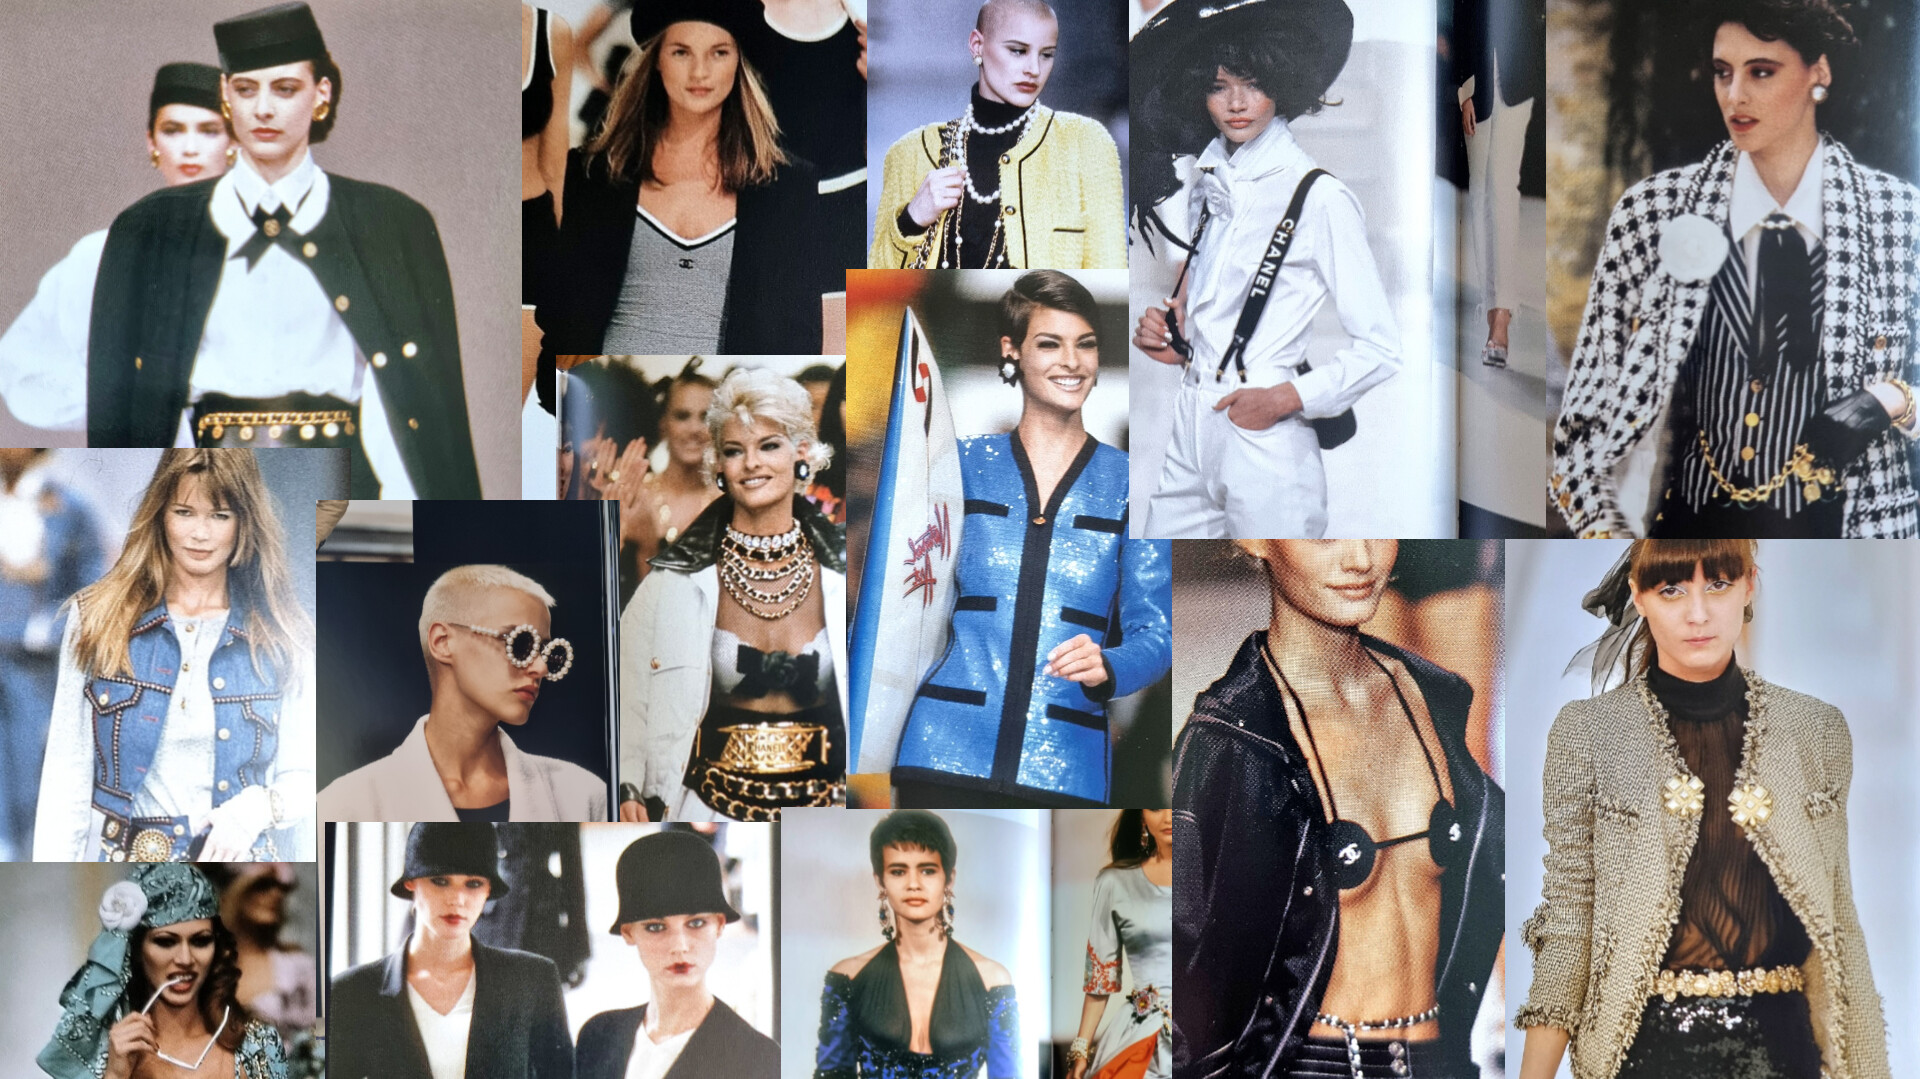 Karl & Coco. How Lagerfeld shaped Chanel